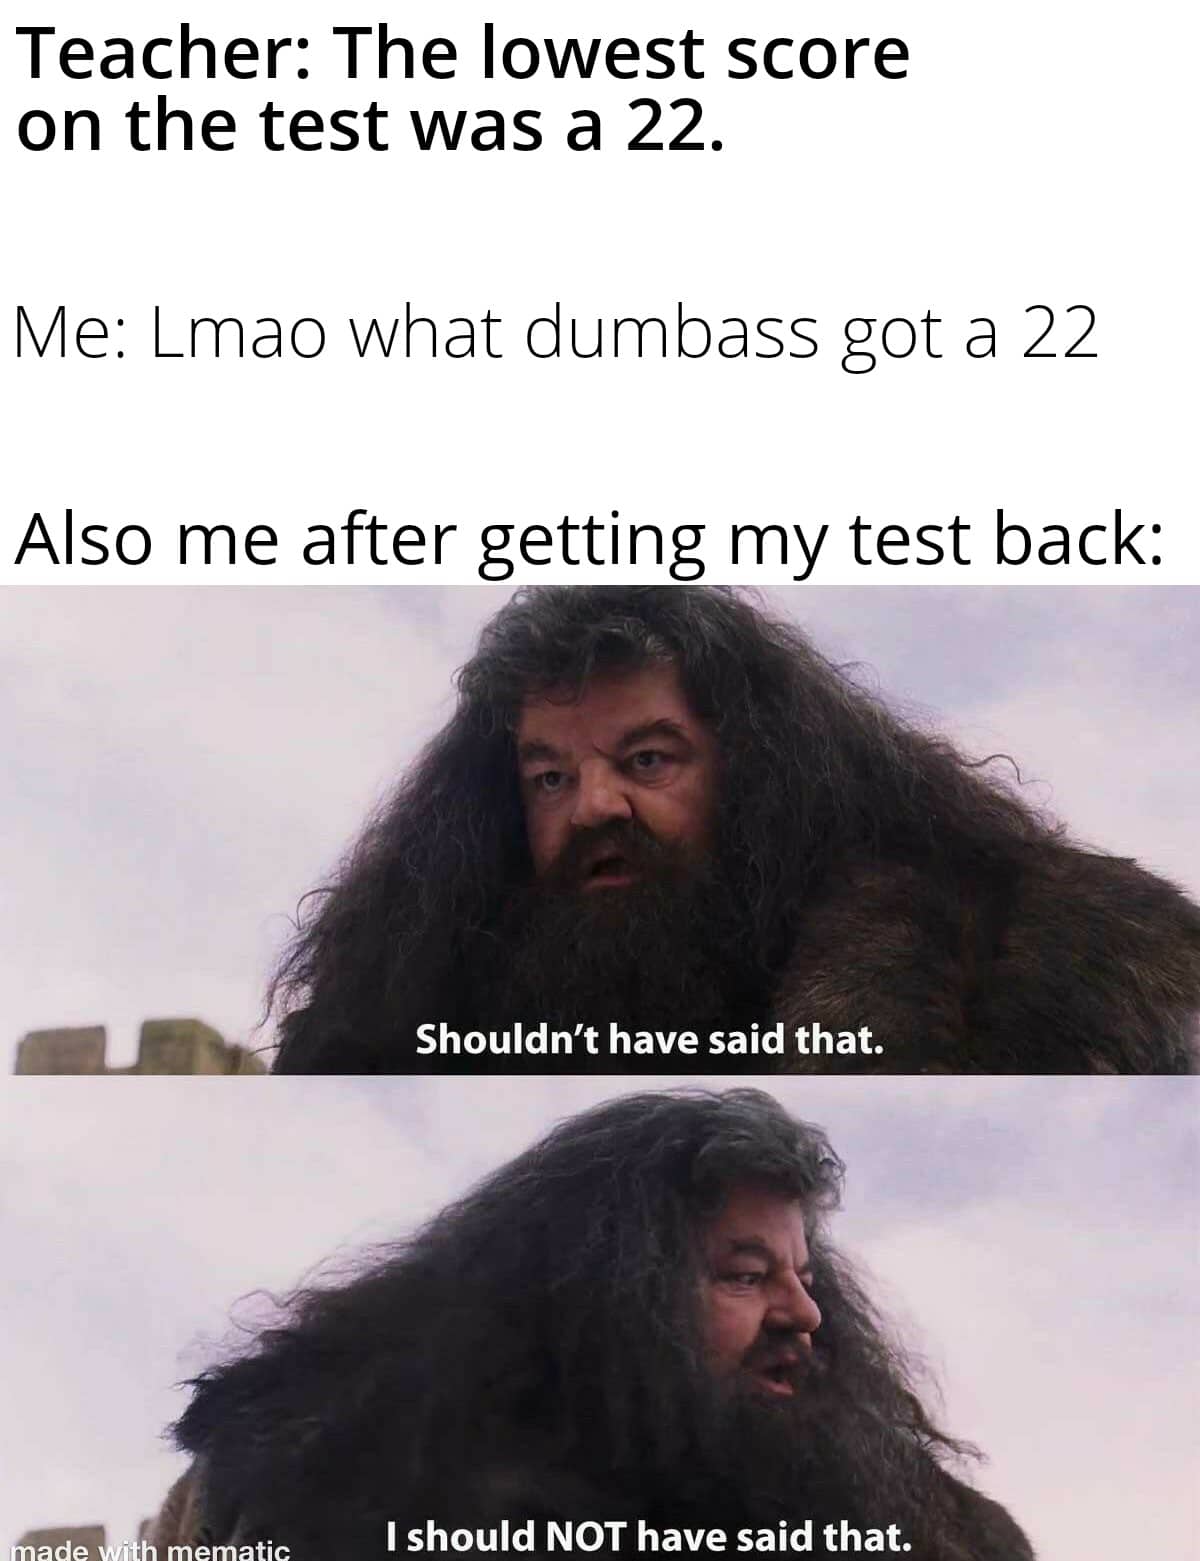 Funny,  other memes Funny,  text: Teacher: The lowest score on the test was a 22. Me: Lmao what dumbass got a 22 Also me after getting my test back: Shouldn't have said that. I should NOT have said that. 